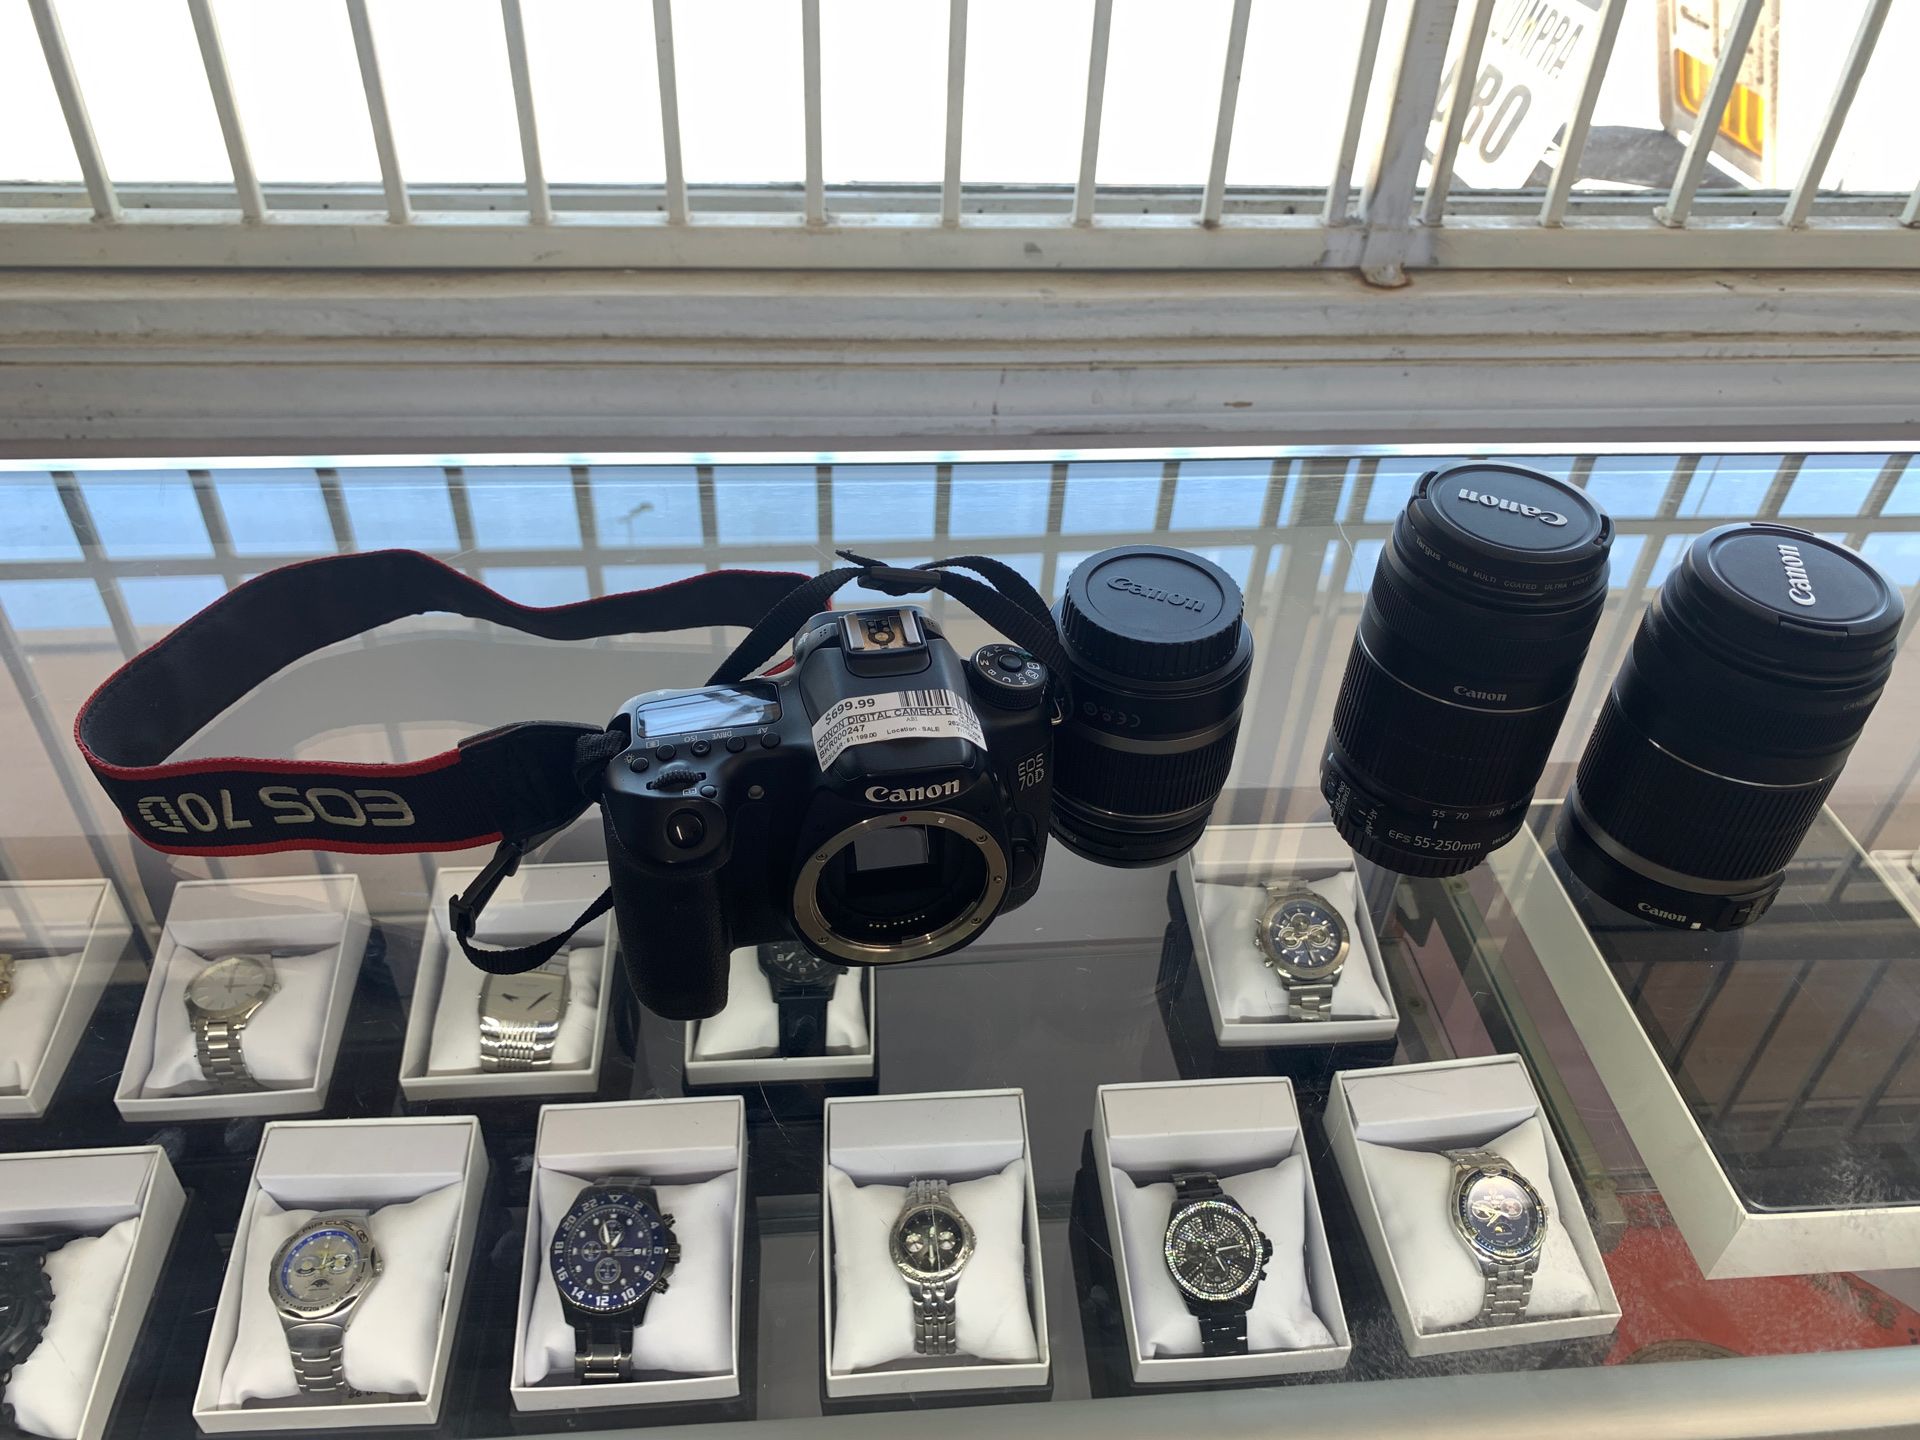 Canon camera with 3 lens